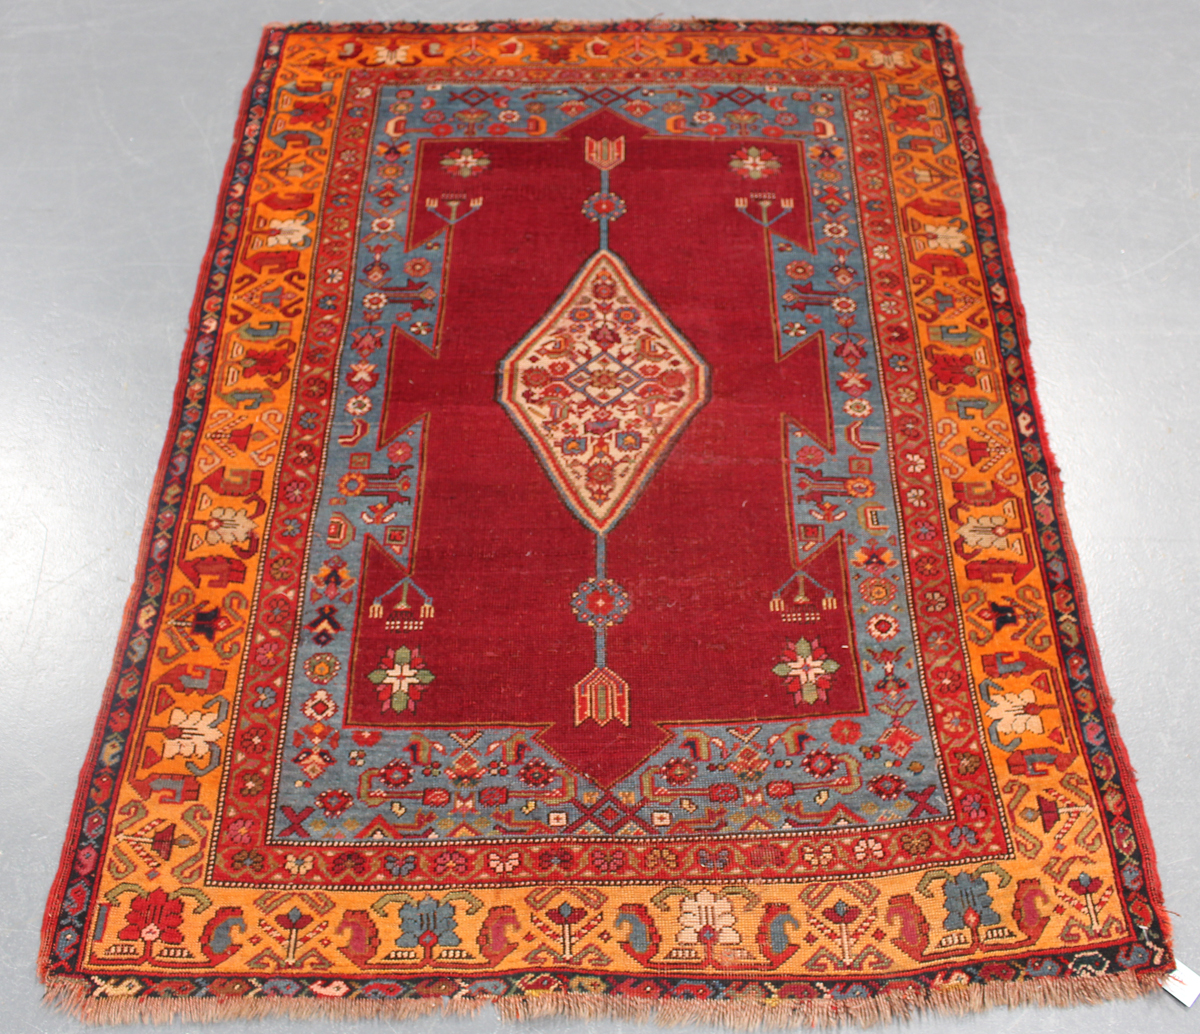 A Garabagh rug, South-east Caucasus, early 20th century, the deep claret field with an ivory